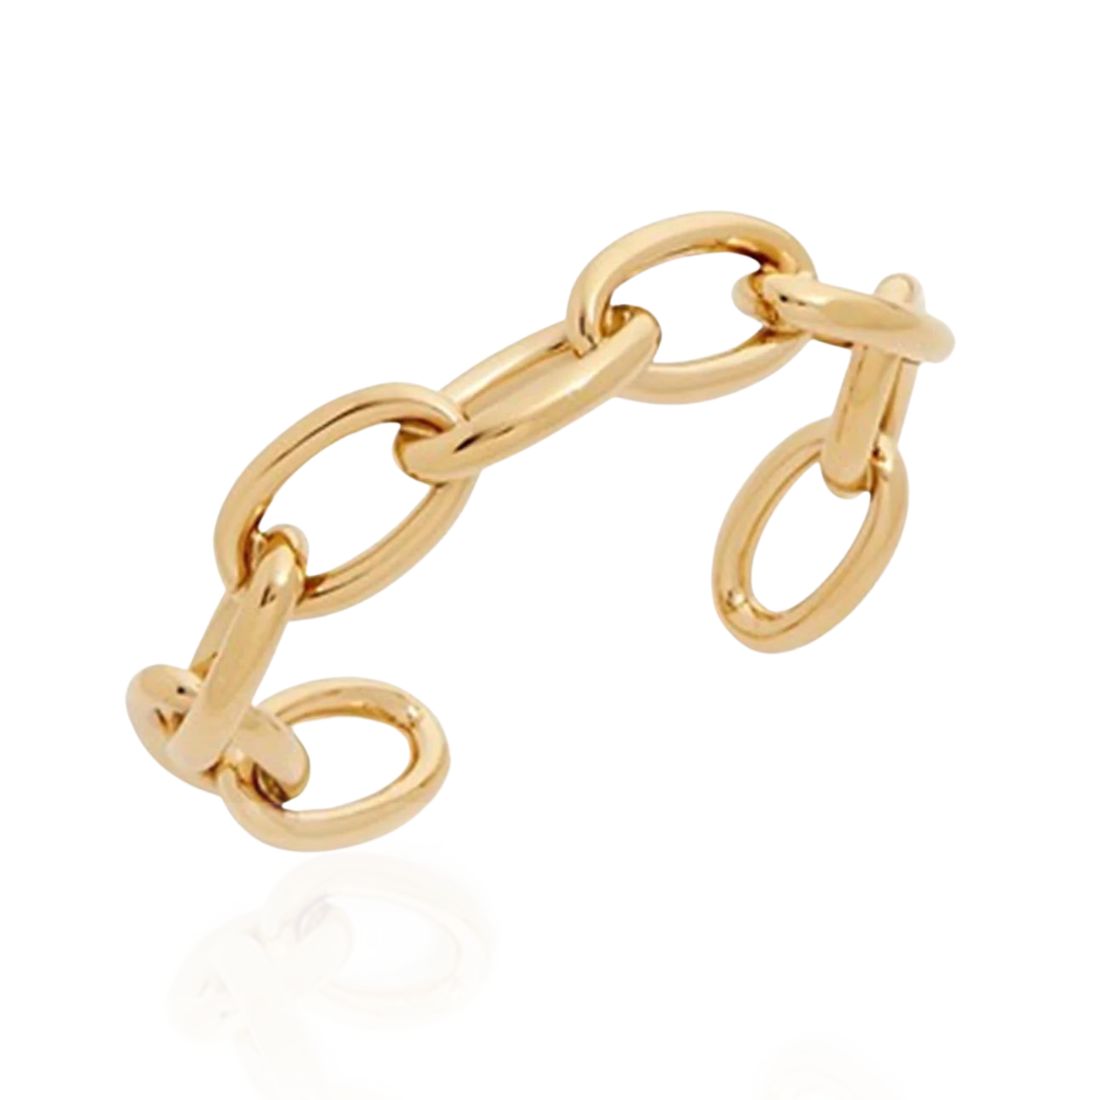 Oval Link Cuff in gold